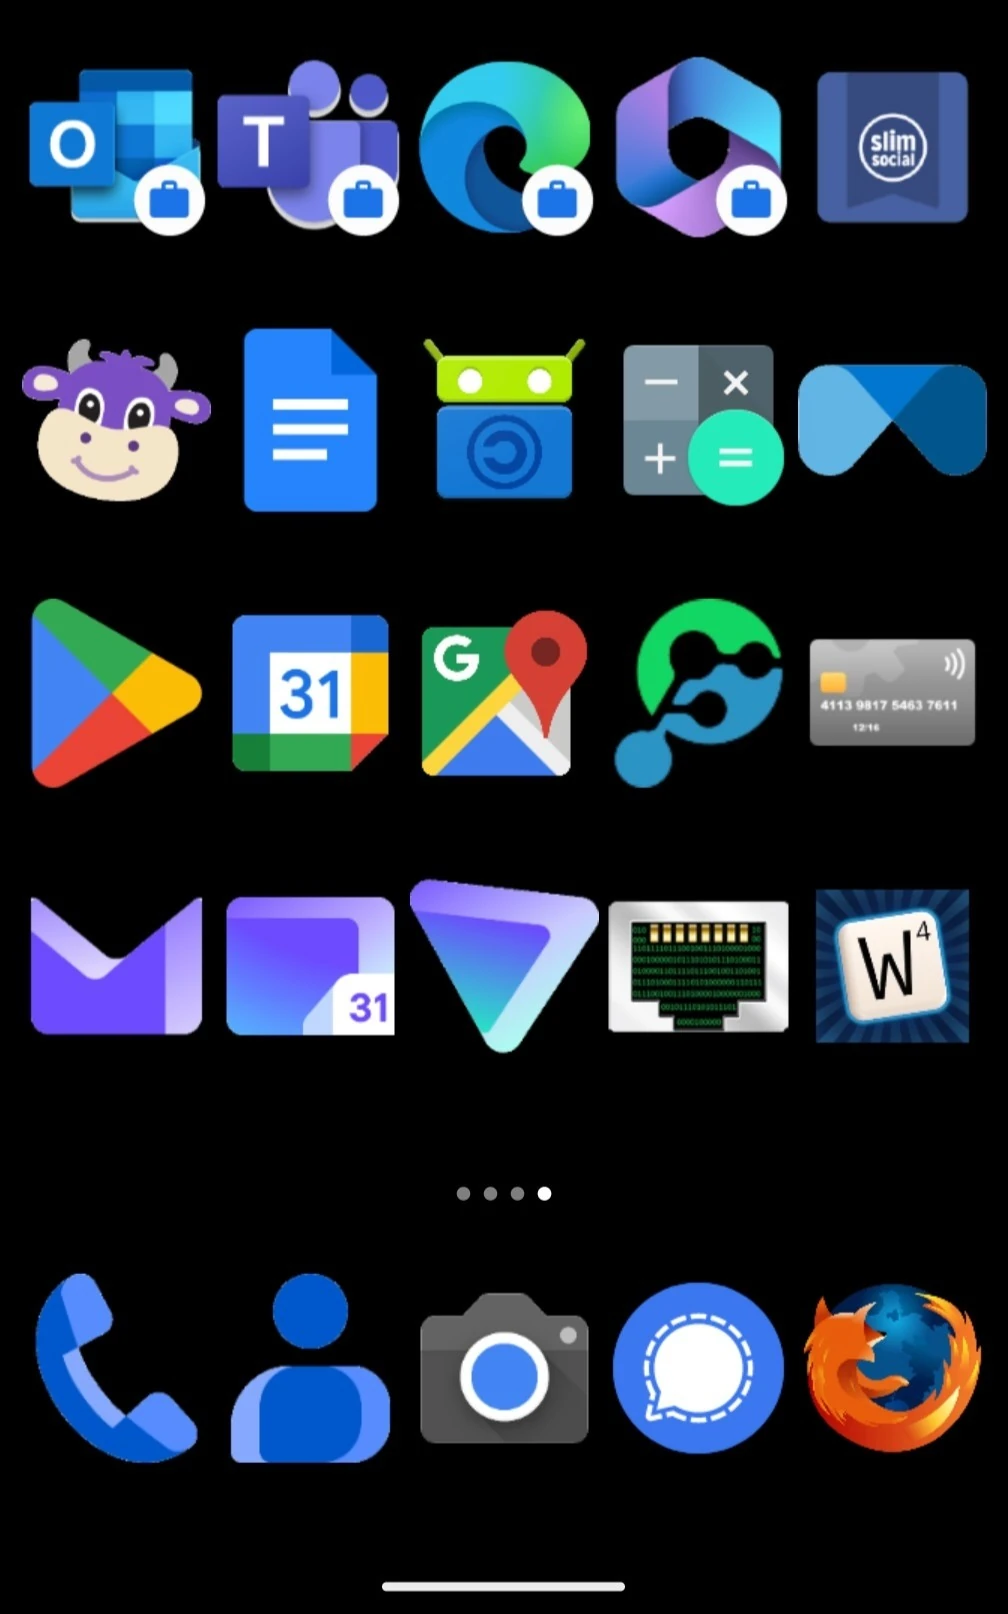 Homescreen filled with multicoloured icons of various shapes.